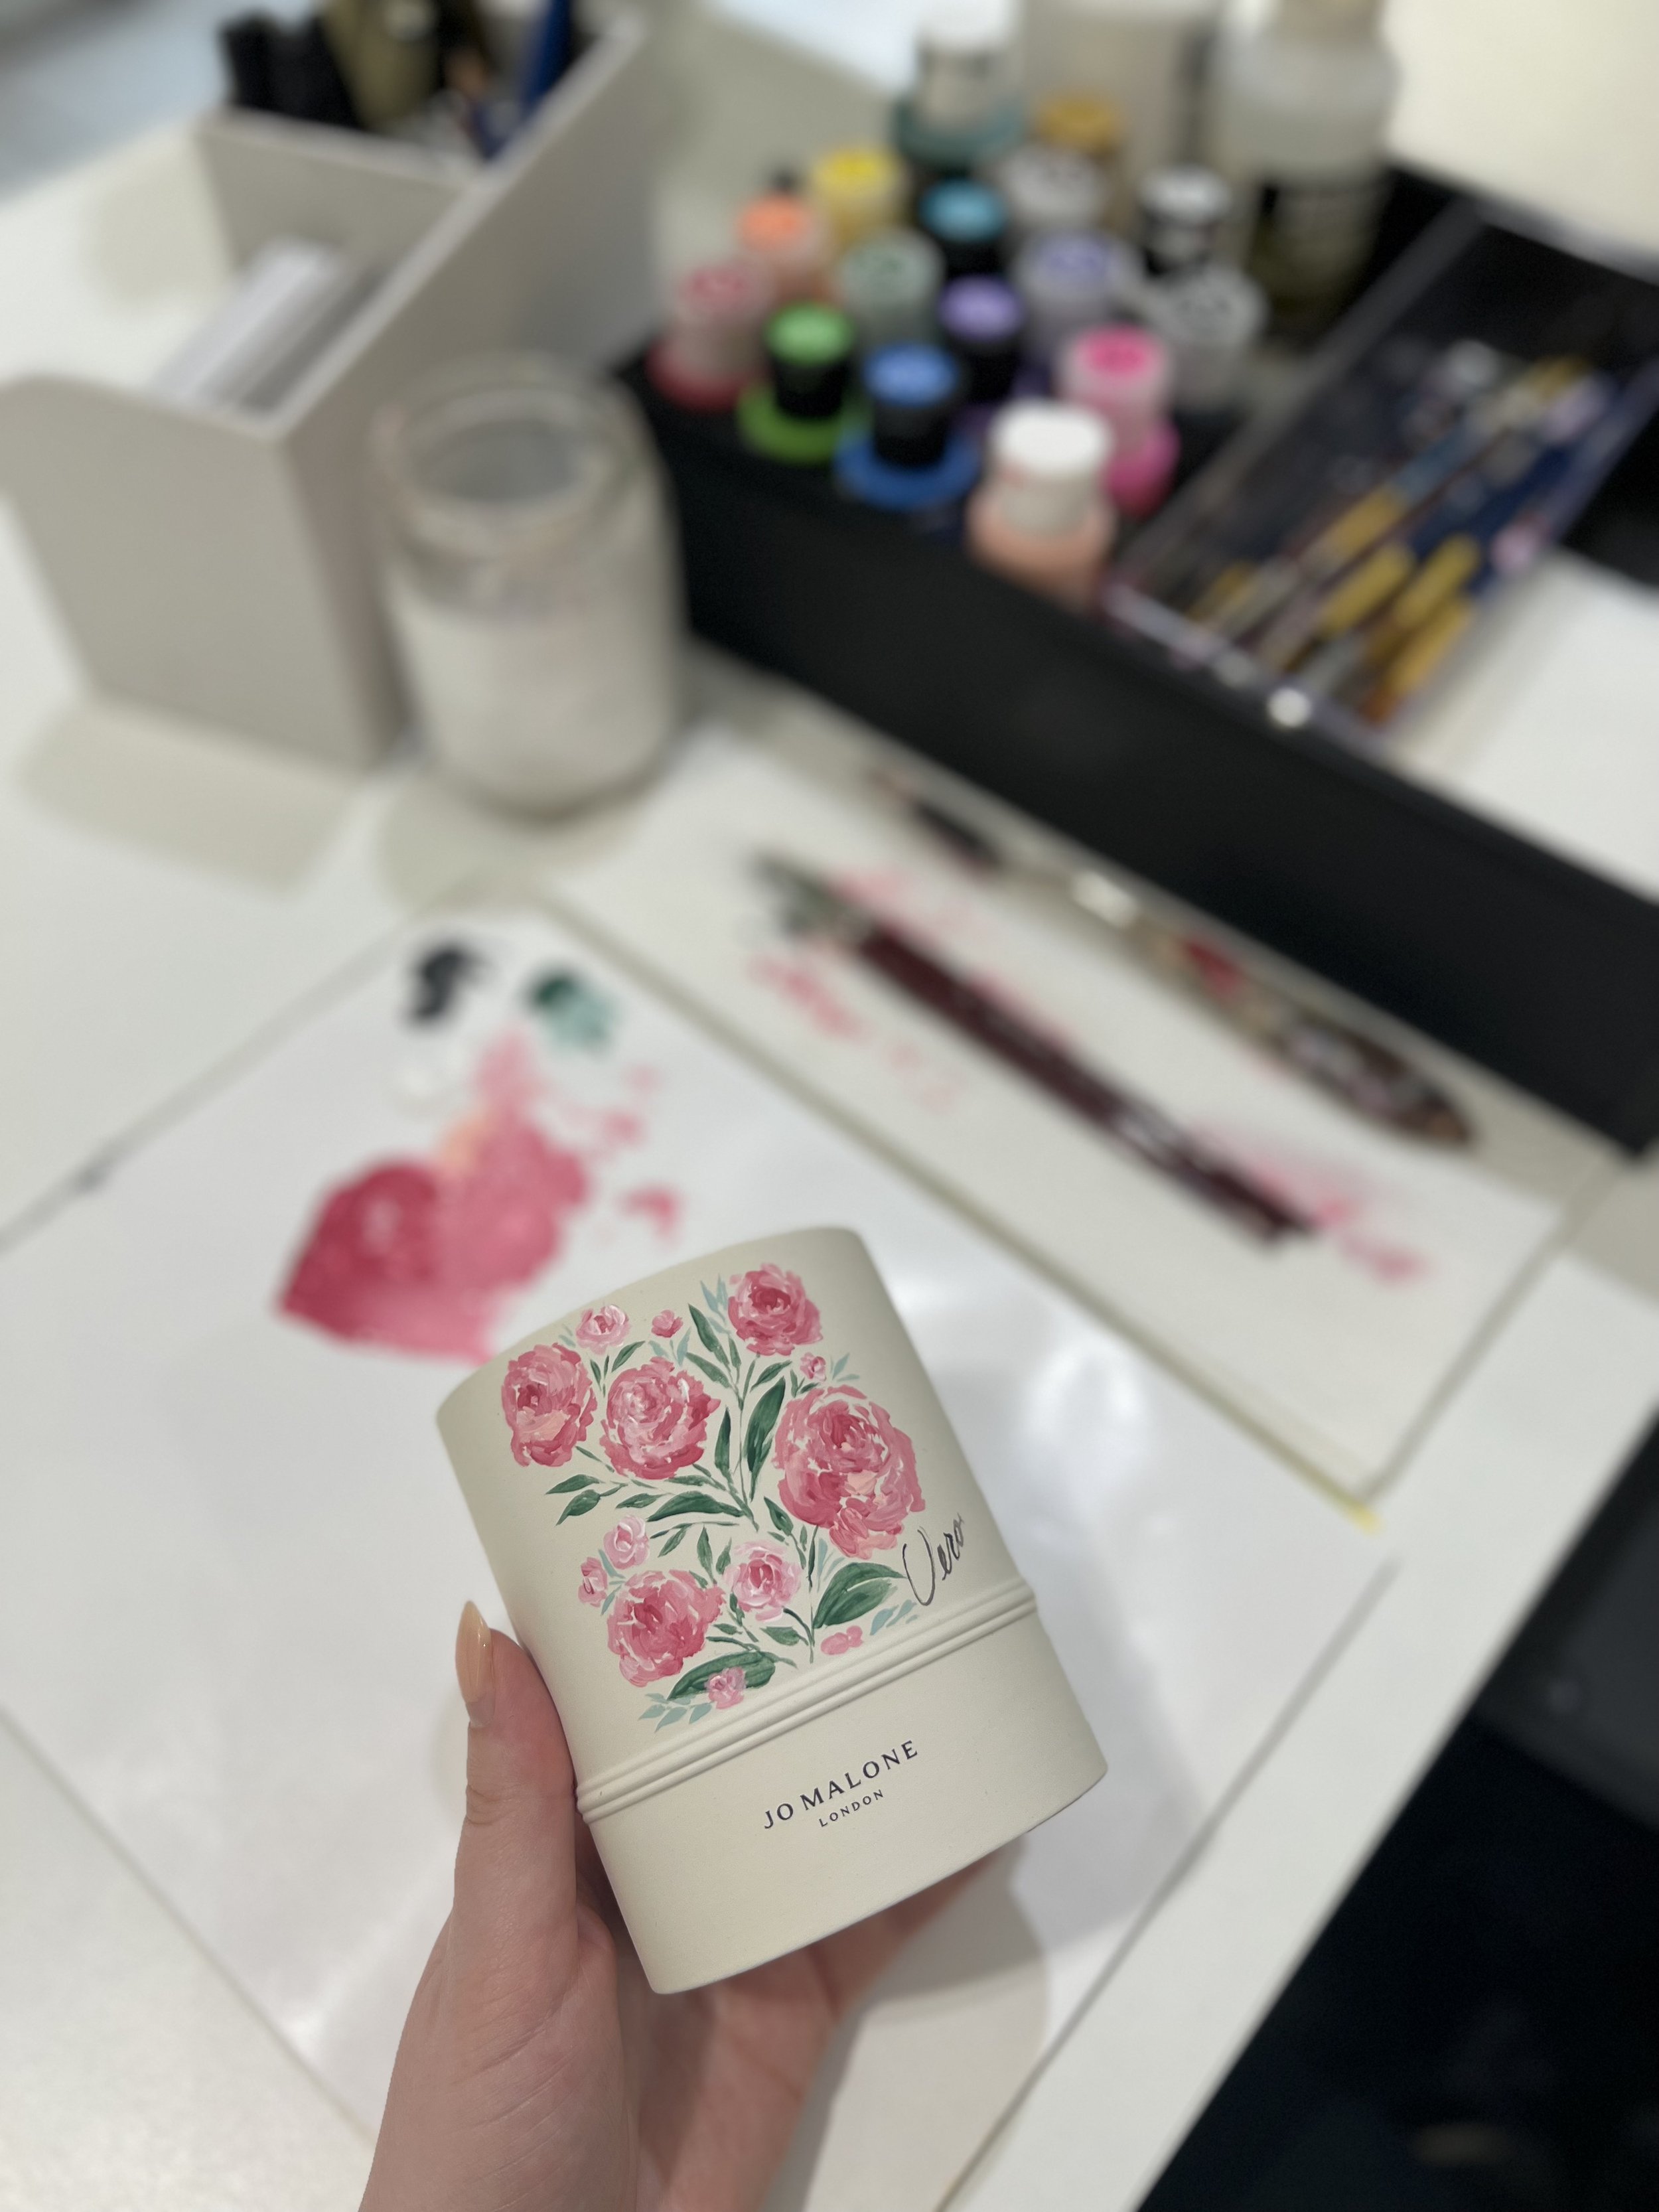 Floral-arrangement-hand-painted-on-jo-malone-candle.jpeg